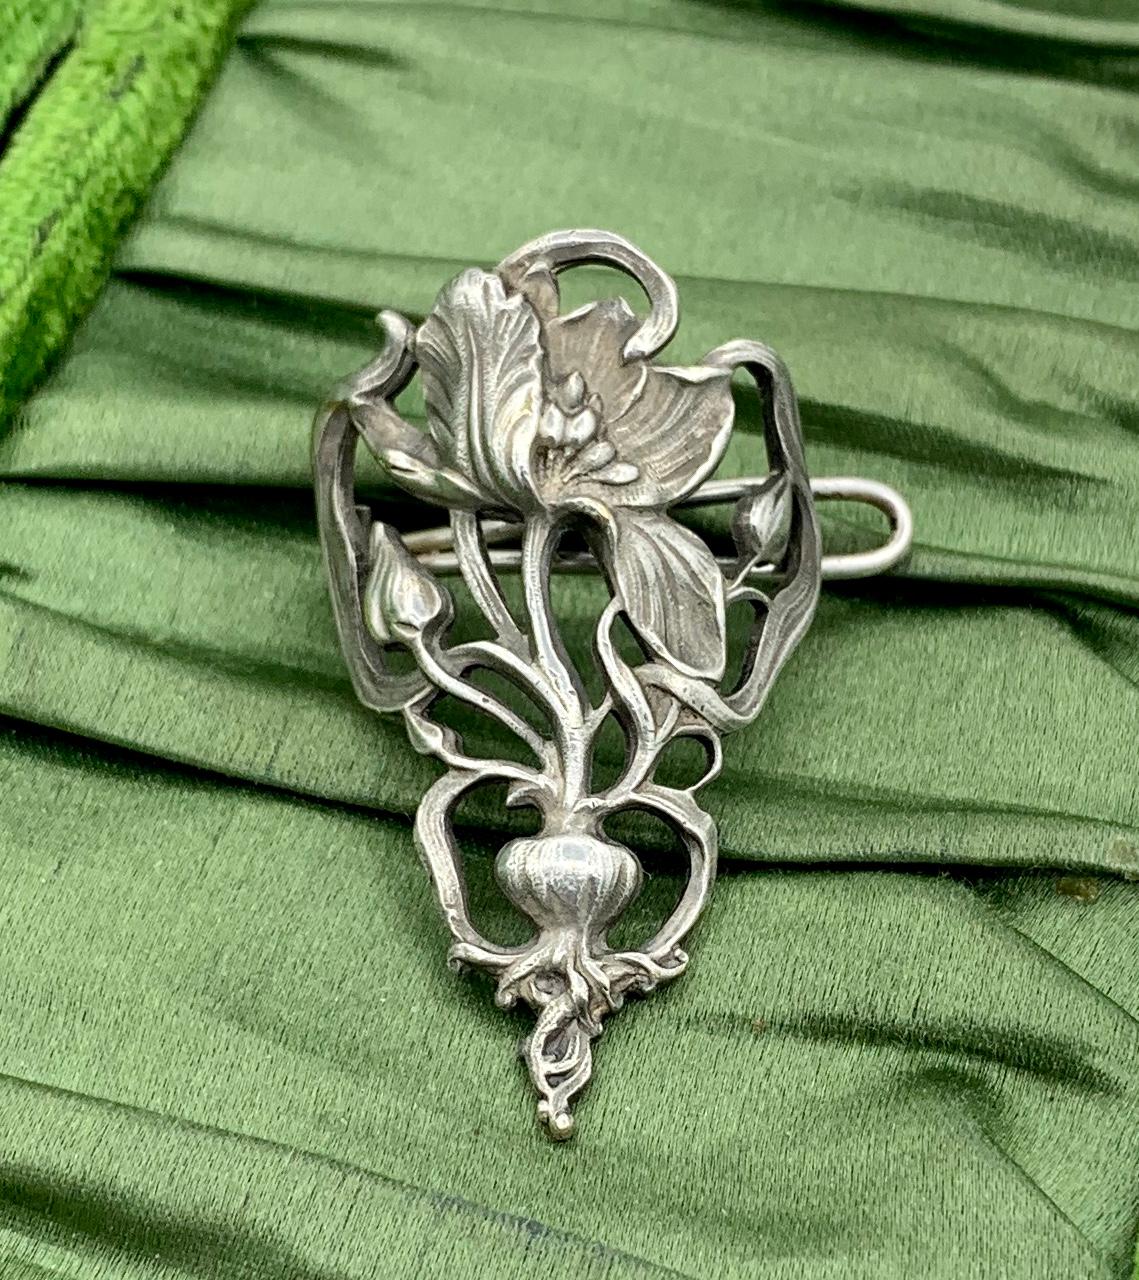 THIS IS A GORGEOUS FRENCH ART NOUVEAU SCARF PIN BROOCH IN SILVER WITH A BEAUTIFUL OPEN WORK REPOUSSE DESIGN OF A POPPY FLOWER WITH STUNNING LEAF, BUD AND SCROLLING FLOWER MOTIFS.
This is just an elegant antique silver poppy flower motif scarf brooch